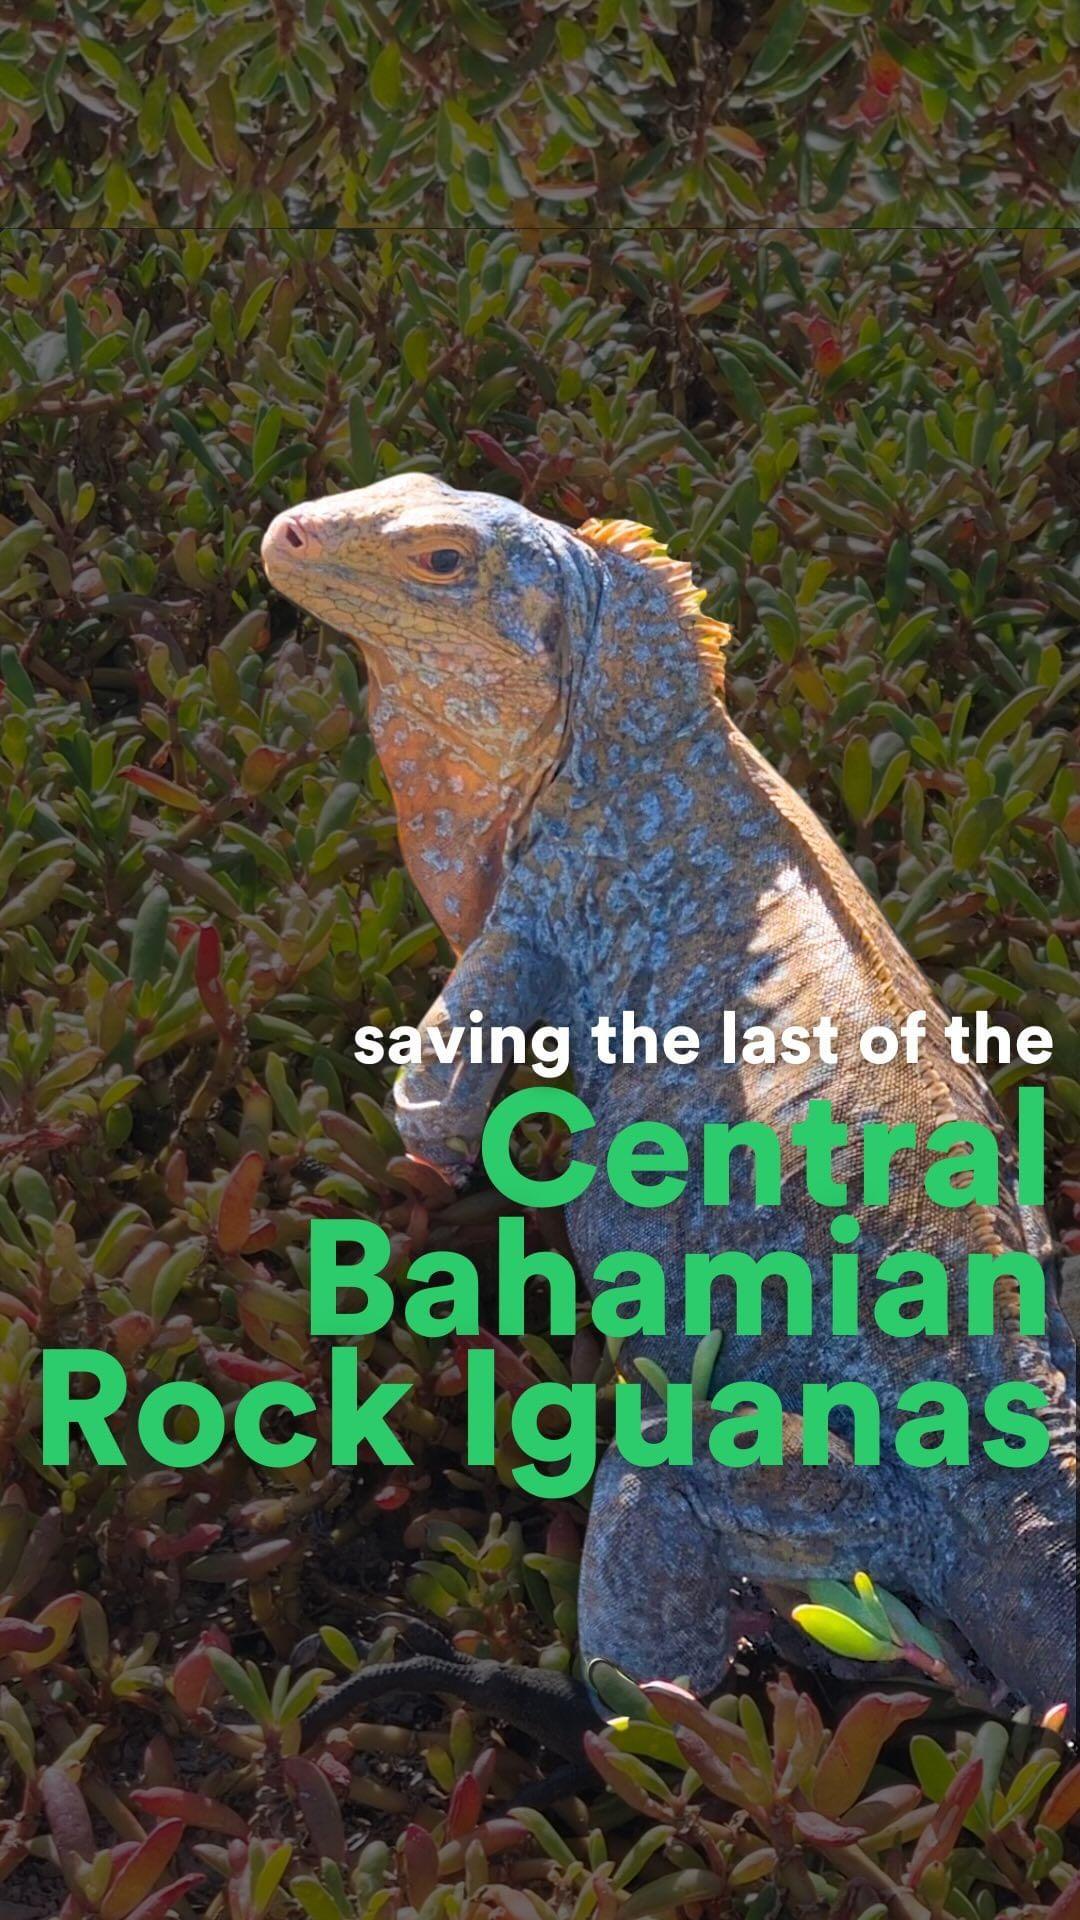 Saving the Endangered Central Bahamian Rock Iguana.

This striking species is threatened by invasive species and habitat loss and only remains on less than 1% of its former range in the Caribbean. 

@rewild and @faunafloraint have partnered with the @bahamasnationaltrust to create a five-year Conservation Action Plan to protect this species. Together we are committed to ensuring a future where the Central Bahamian Rock Iguana thrives once again. 

Hear from Giselle Deane, senior science officer, of The Bahamas National Trust on this endemic iguana species. #RewildTheCaribbean

The development of this action plan and the workshop was supported by Re:wild, Fauna & Flora and the Critical Ecosystem Partnership Fund under the project “Call to Action: Action Planning for Endangered Caribbean Species” (2023-2026), which aims to create enabling conditions for the recovery of priority threatened species in Antigua & Barbuda, The Bahamas, Jamaica, Saint Lucia, and St. Vincent & the Grenadines.

Video: Justin Springer, Re:wild Caribbean program officer 

#SavingNatureTogether @cepf_official @Worldbank @canari_caribbean